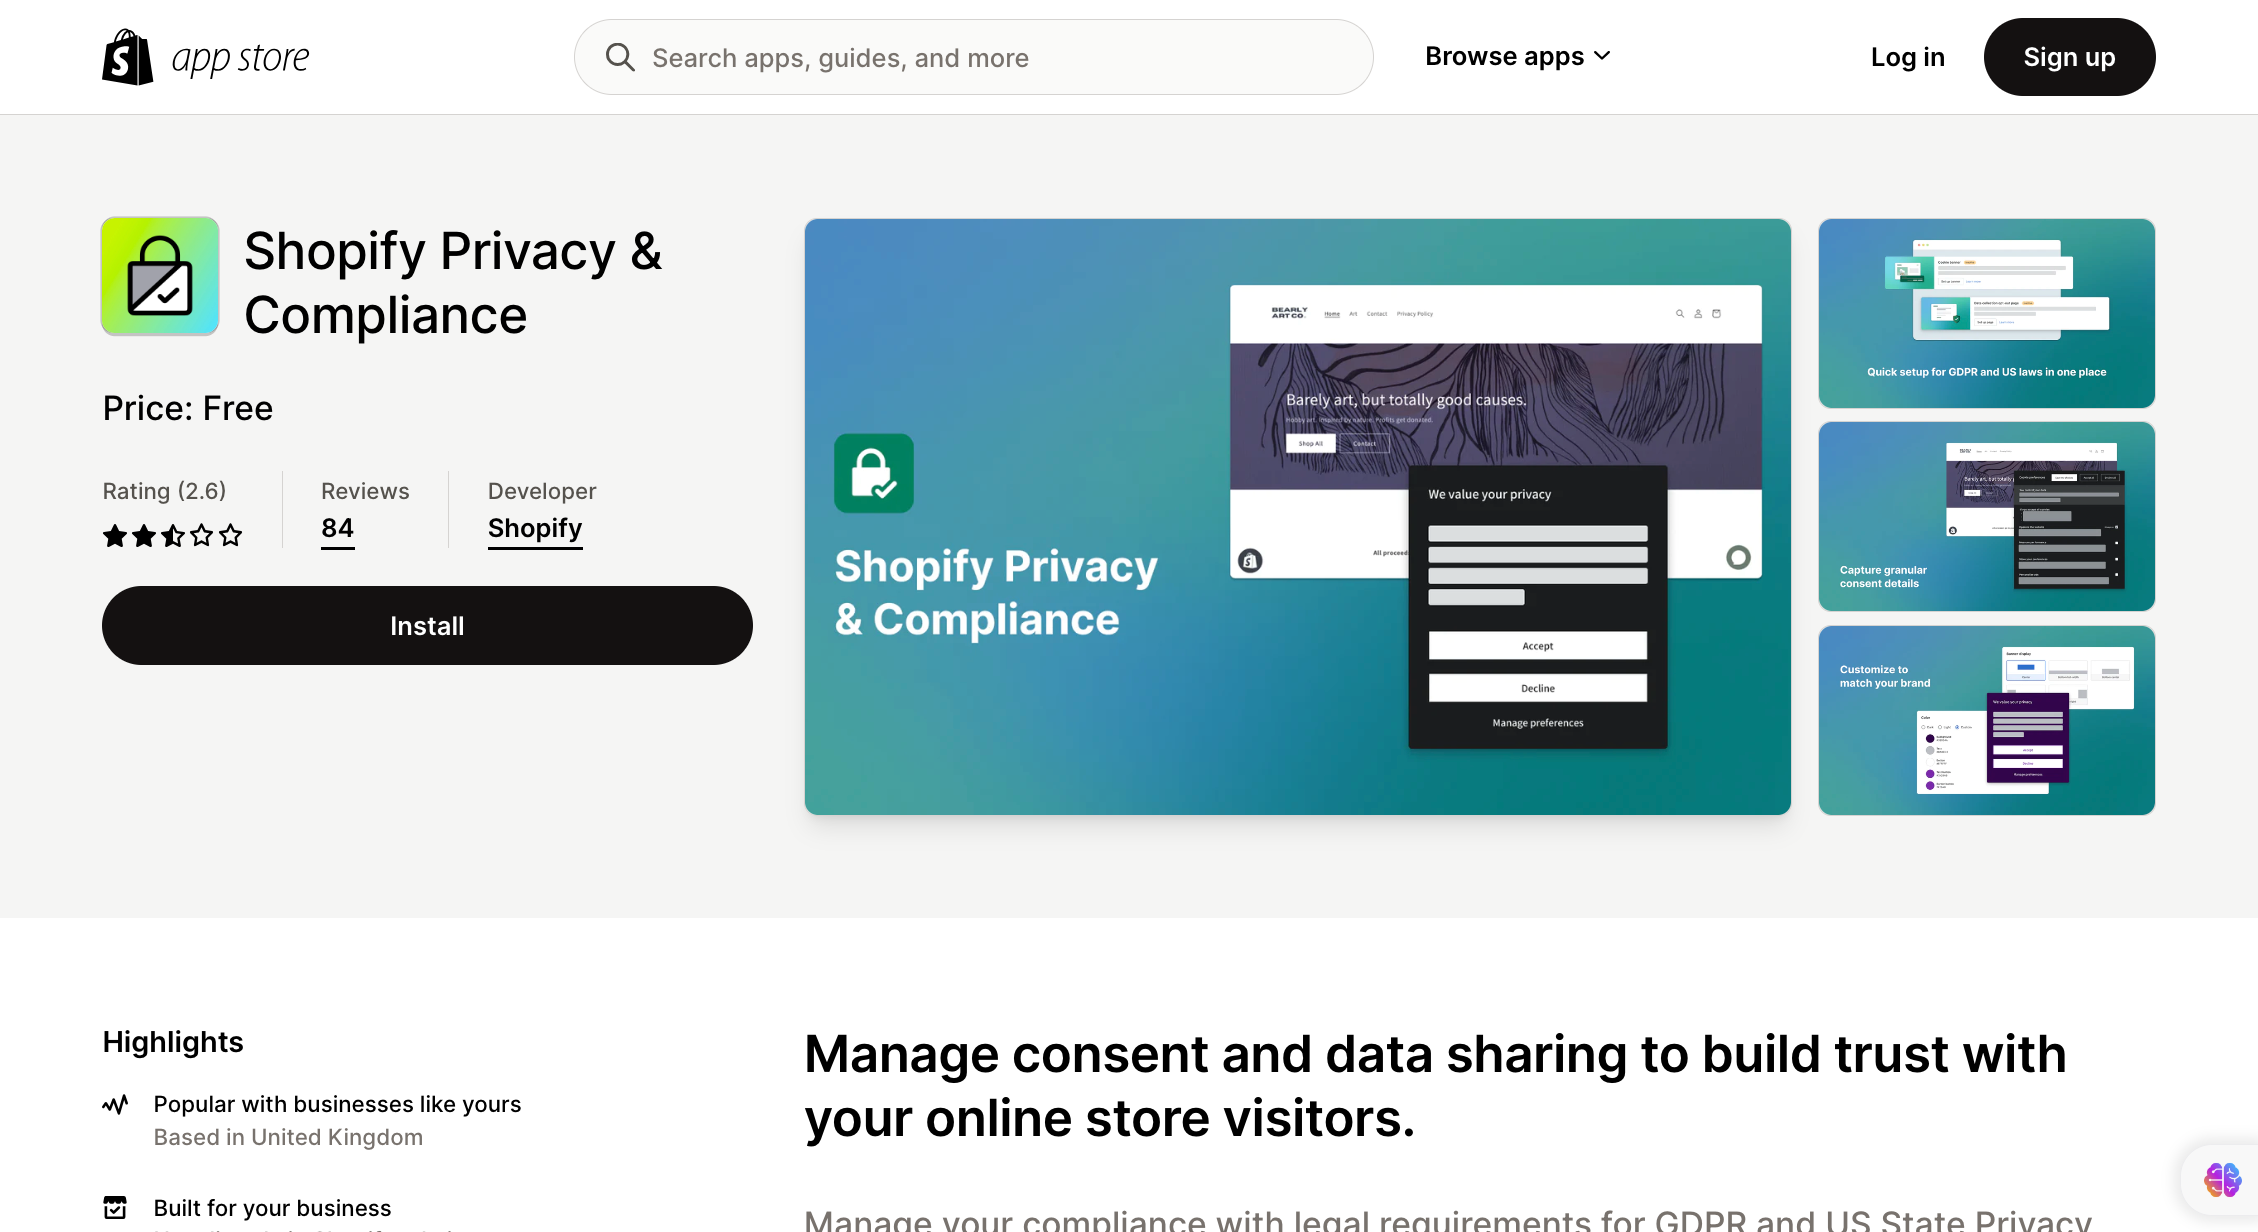 Shopify-Privacy-Compliance-Add-privacy-preferences-management-options-Shopify-App-Store